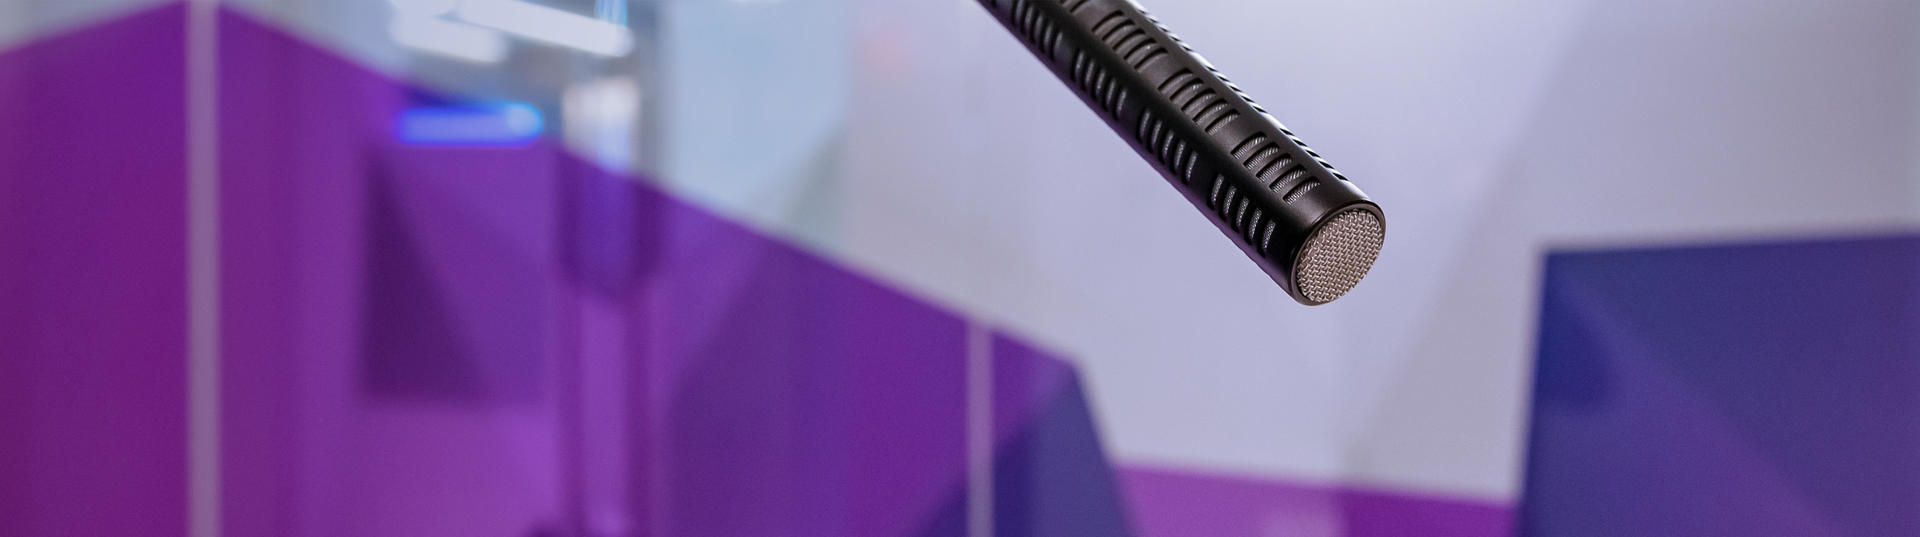 Microphone in front of purple background